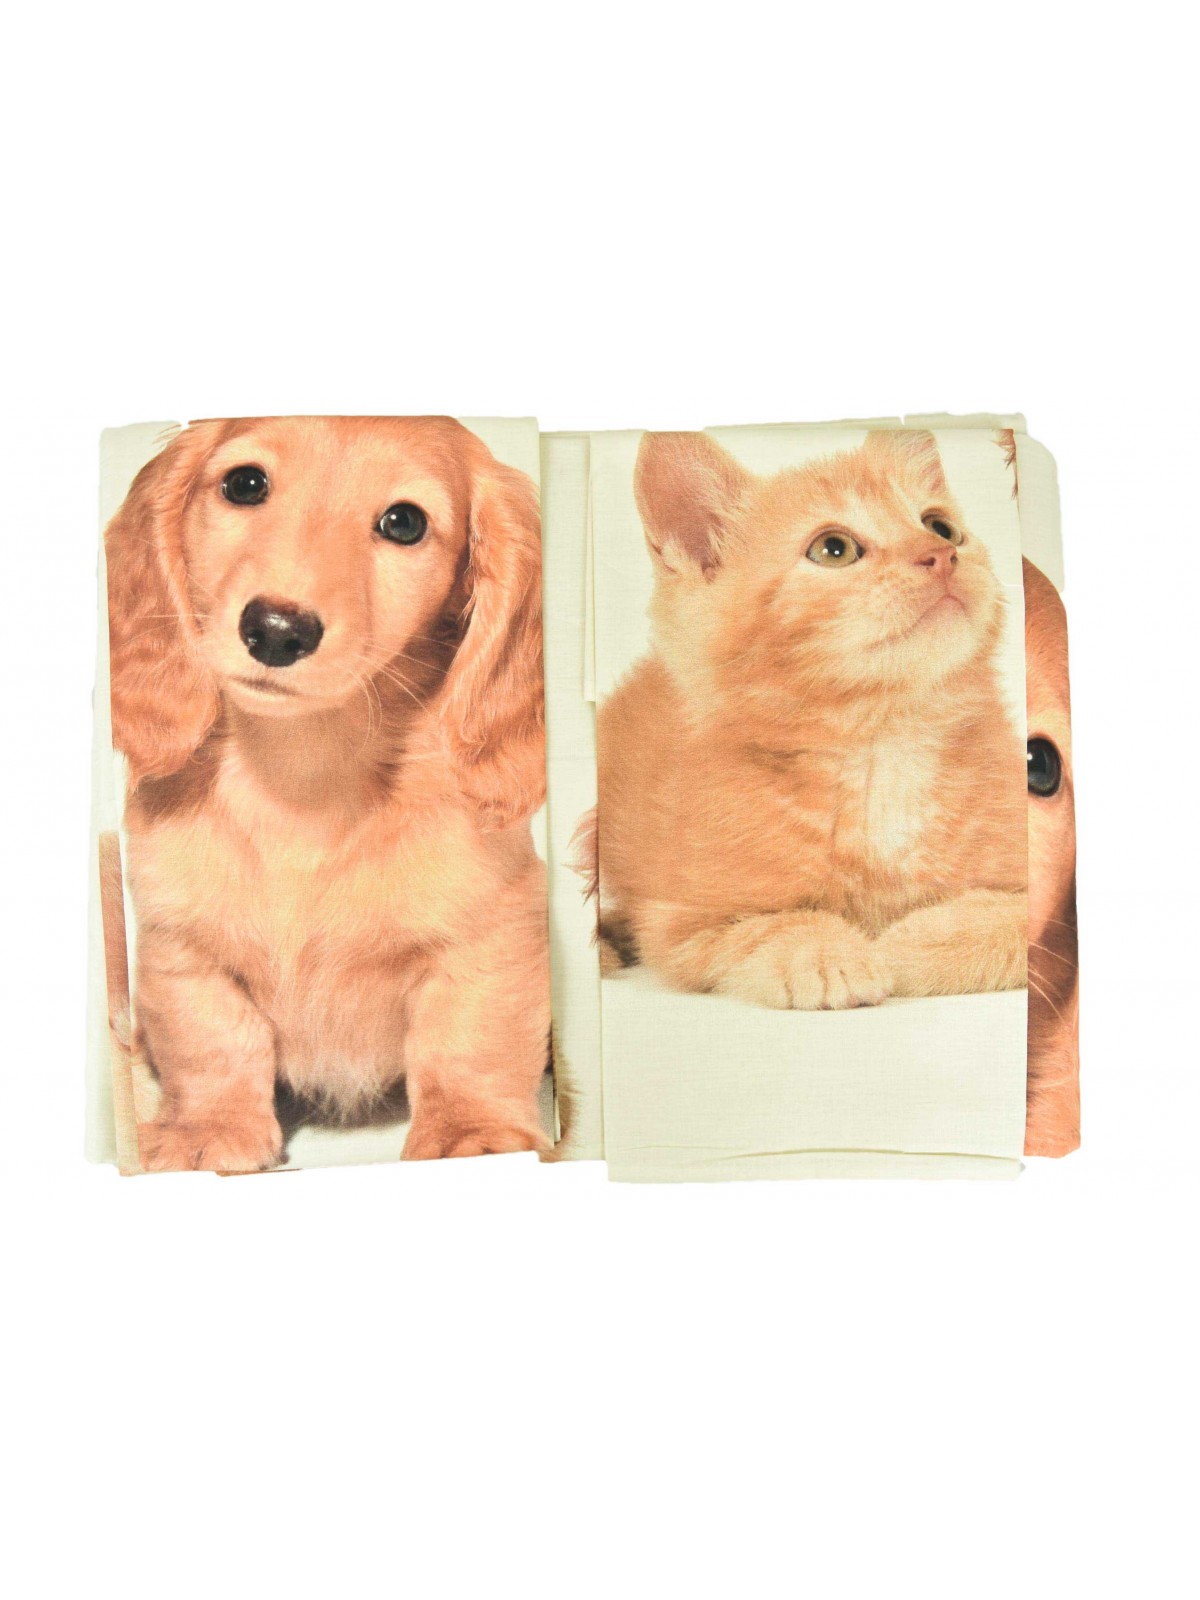 Duvet cover Double Puppies Cat Dog Digital Printing 250x200 +2 Pillowcases